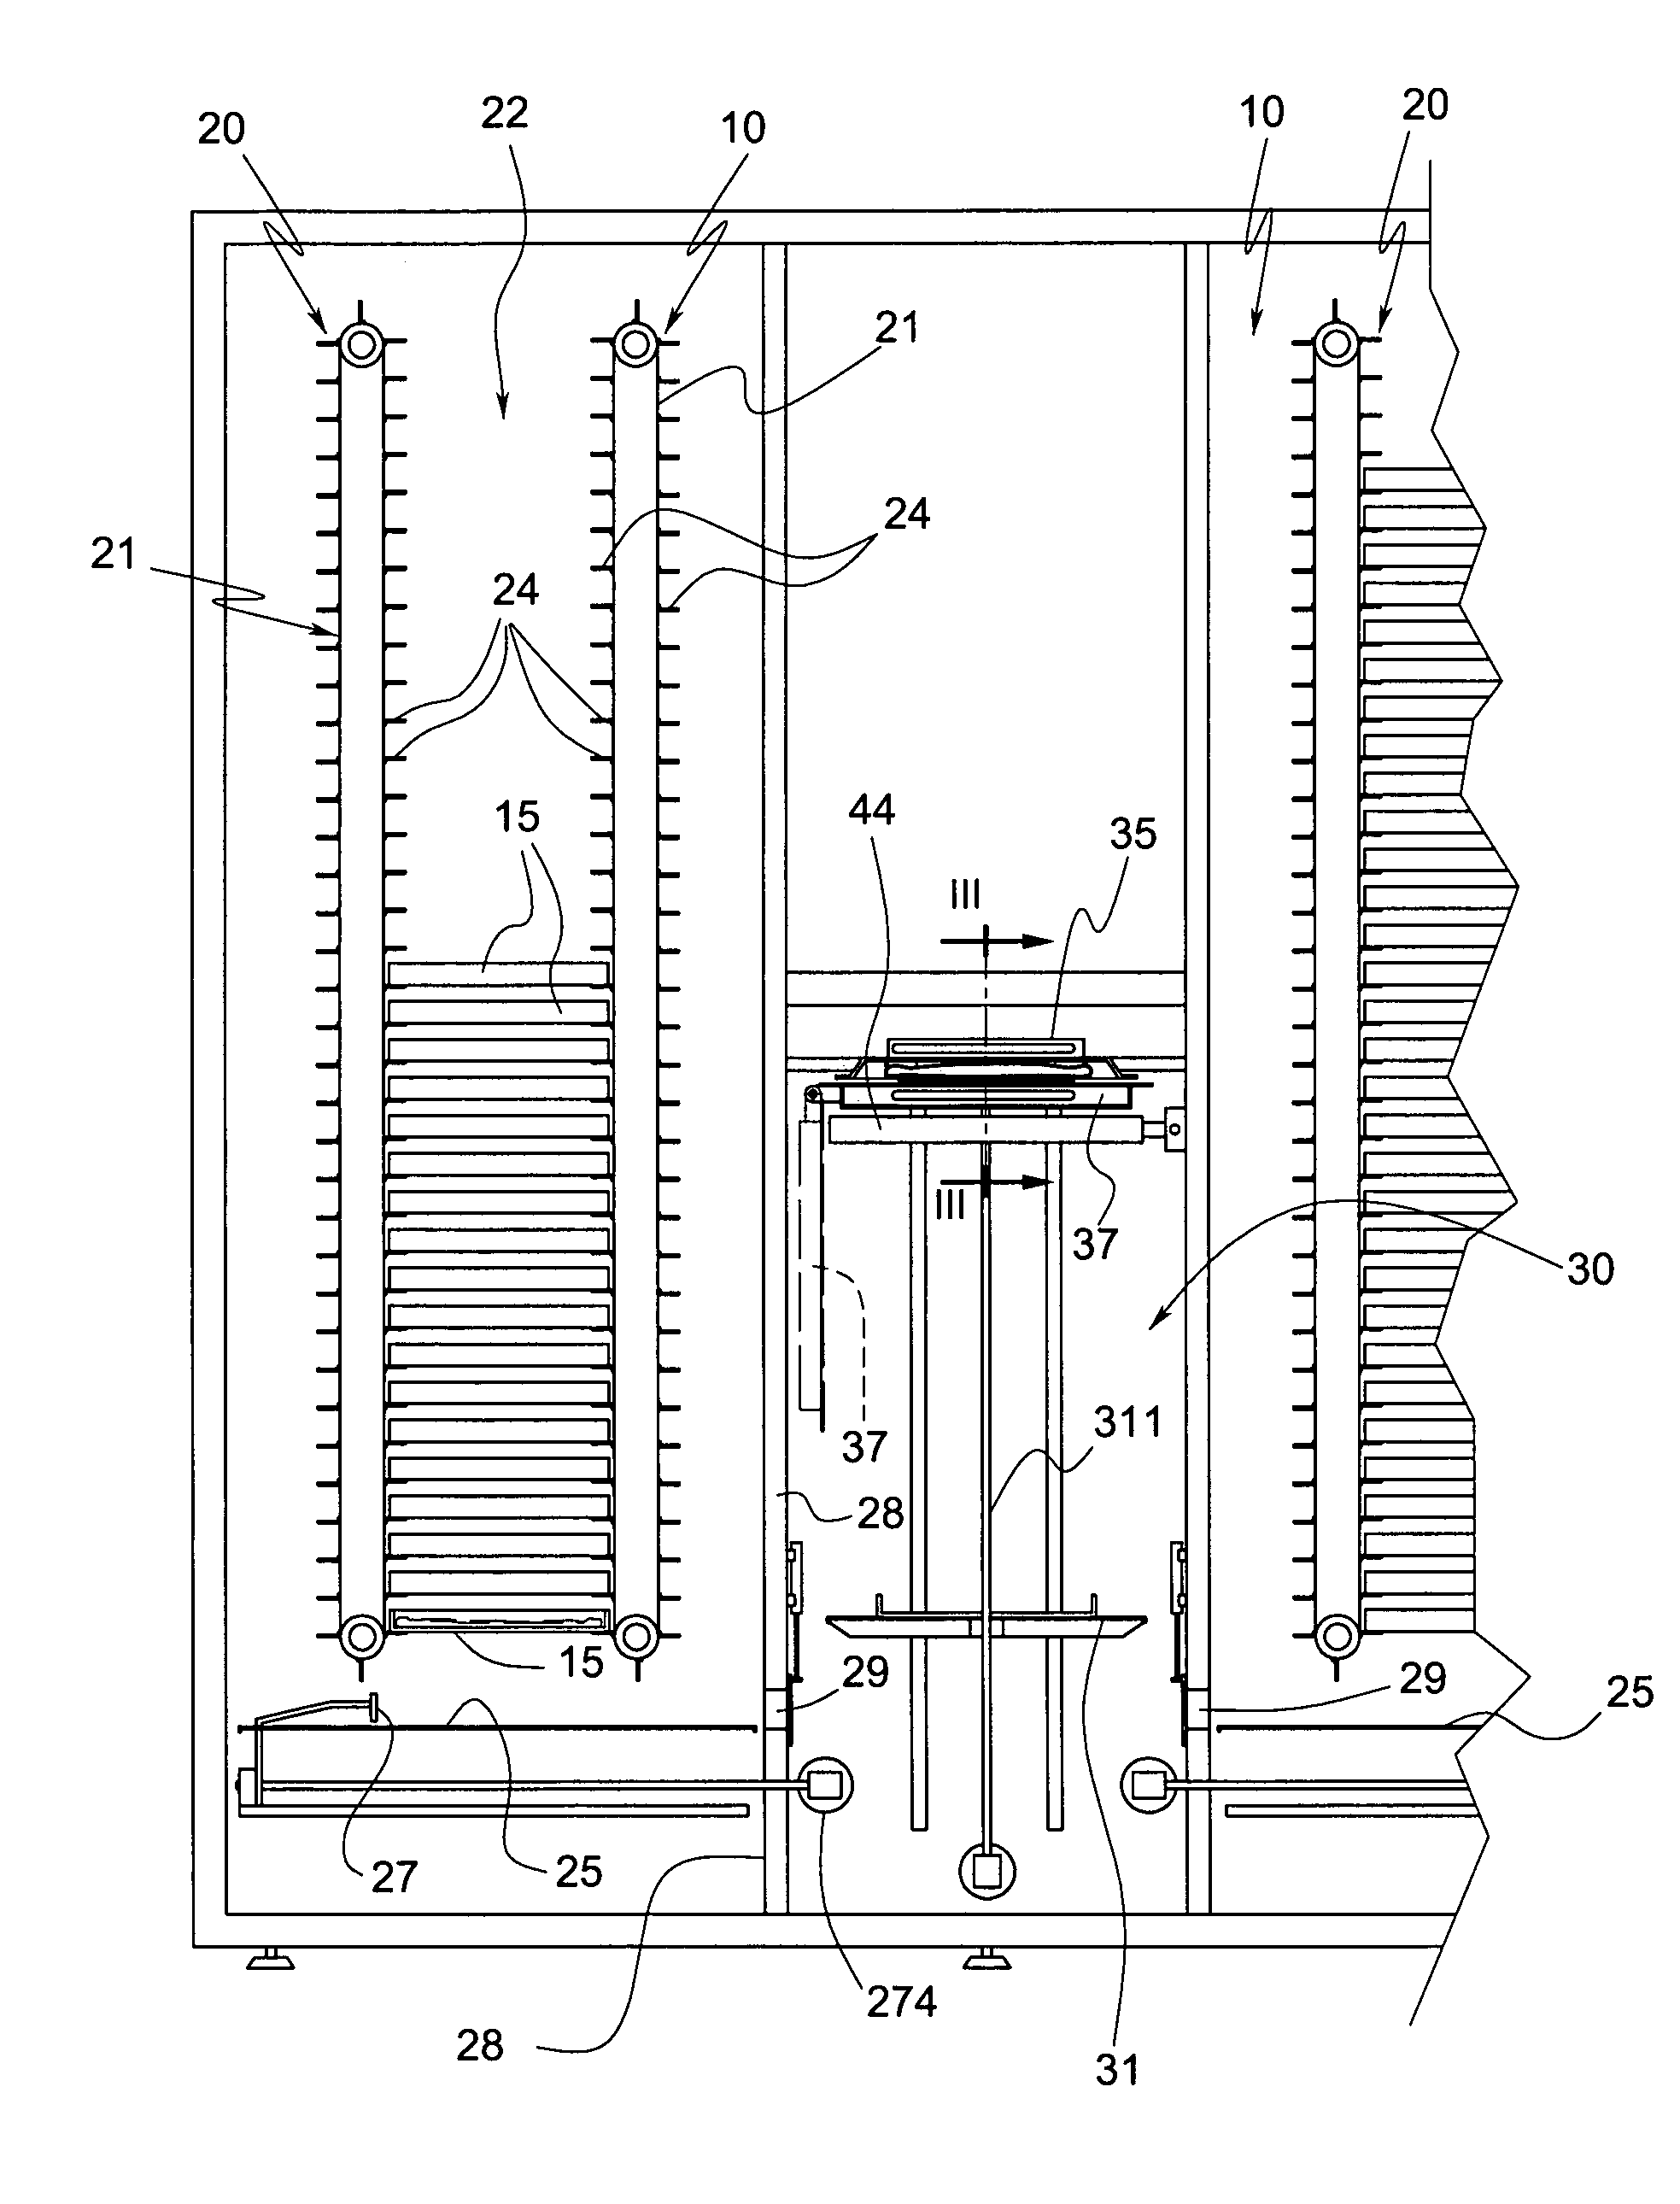 Automatic distributor apparatus for heated food products, such as pizzas or other products, and an operating method